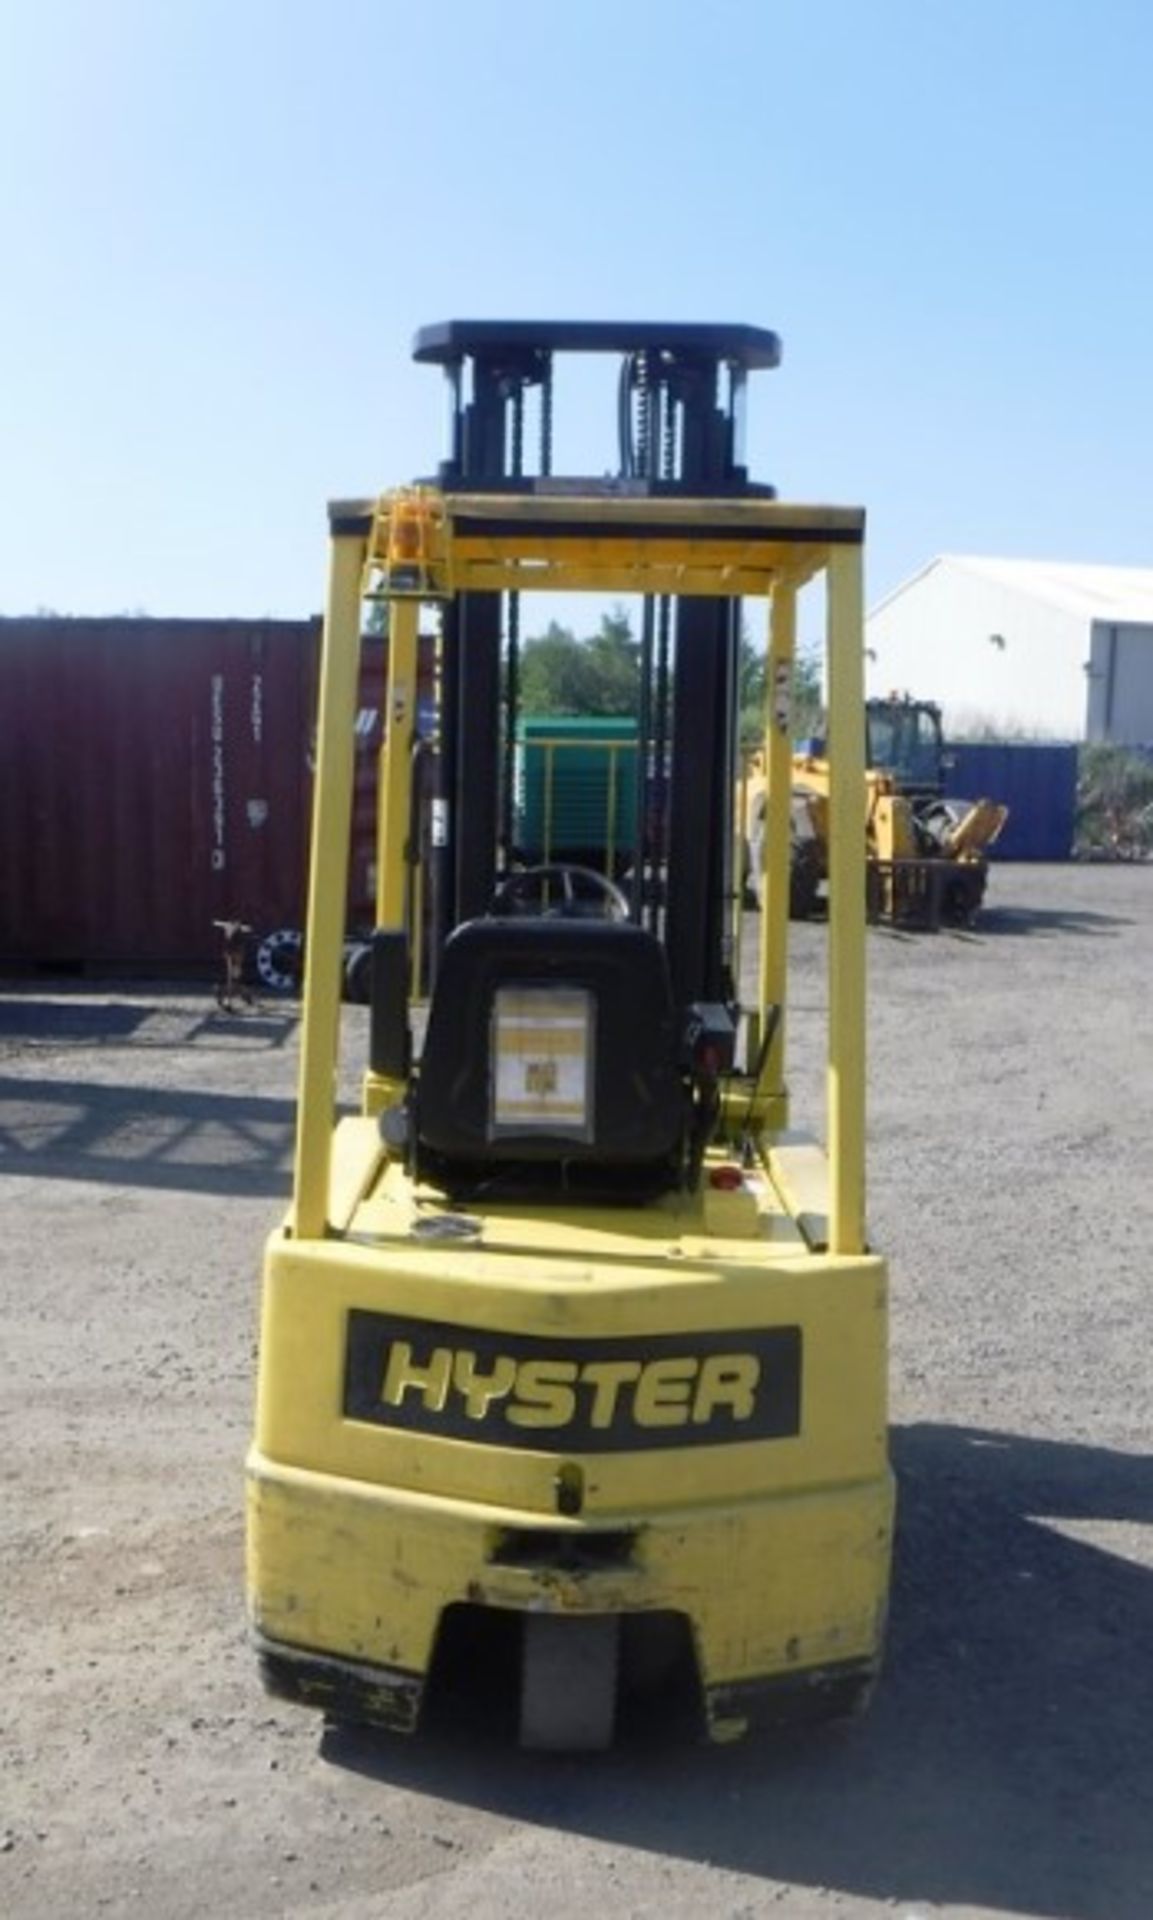 2011 HYSTER forklift A 1.50XL, s/n - C203B01762J, Max Reach - 3800mm, 402hrs (not verified) - Image 12 of 13